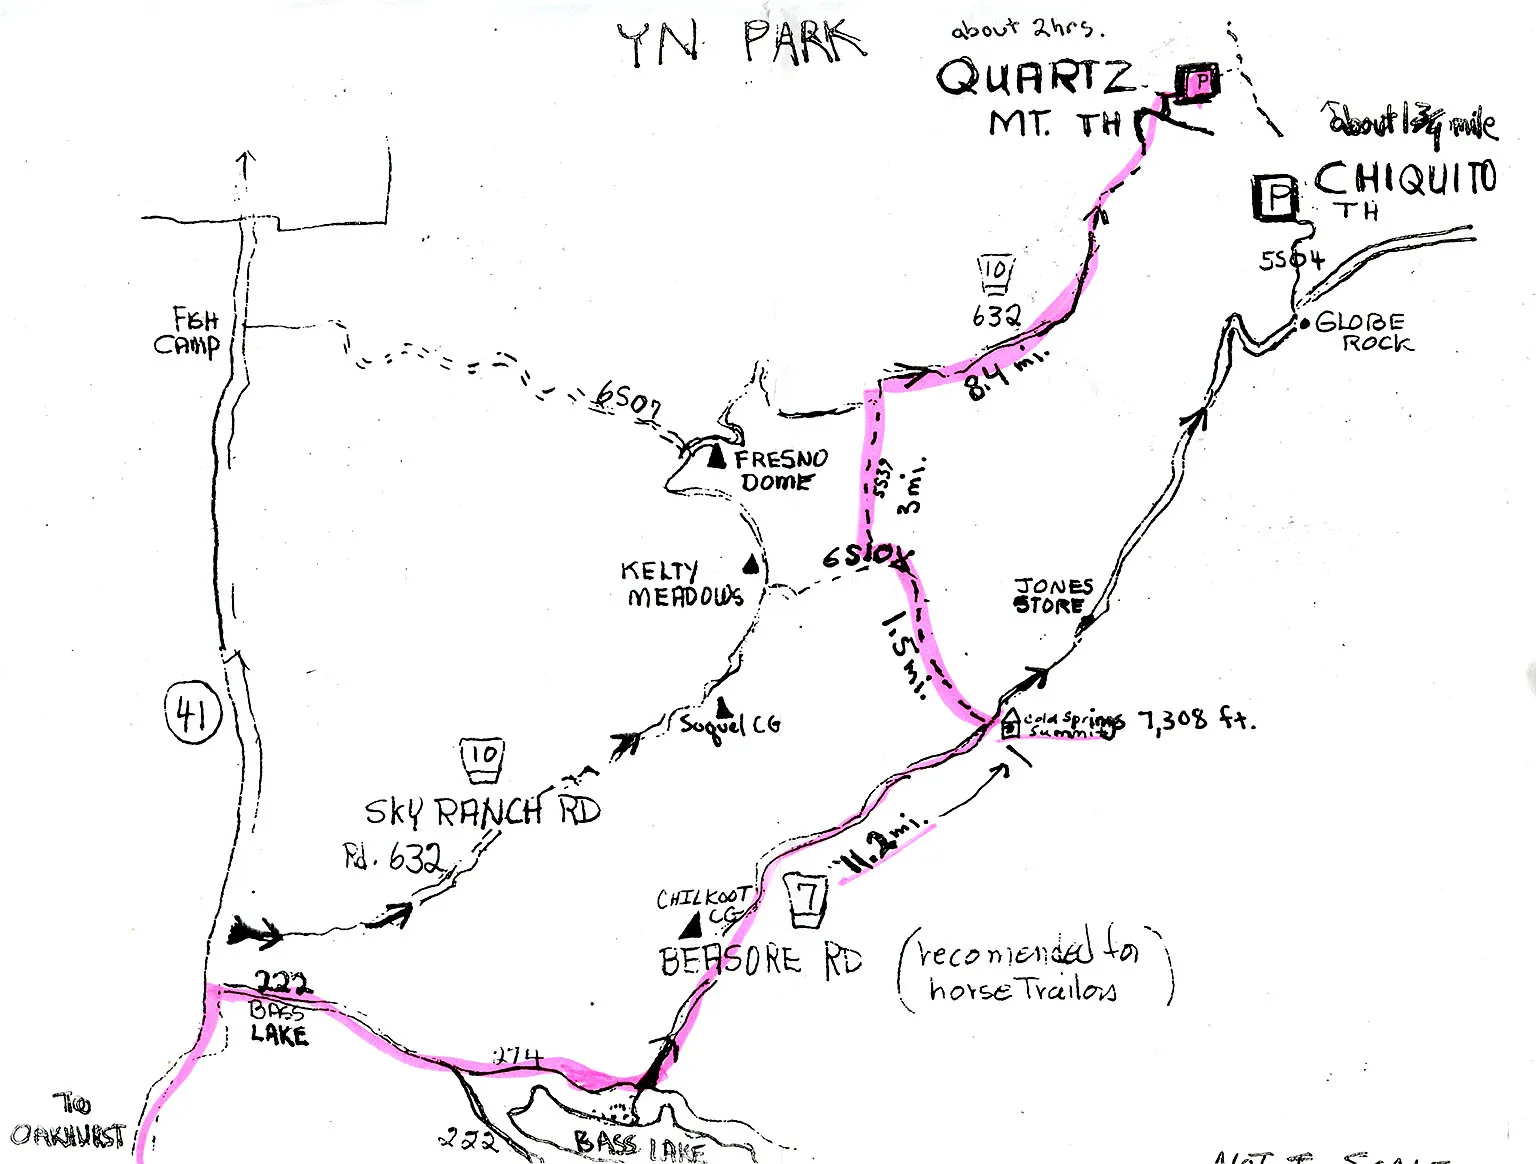 Driving directions to Quartz Mountain trailhead as of August 2016